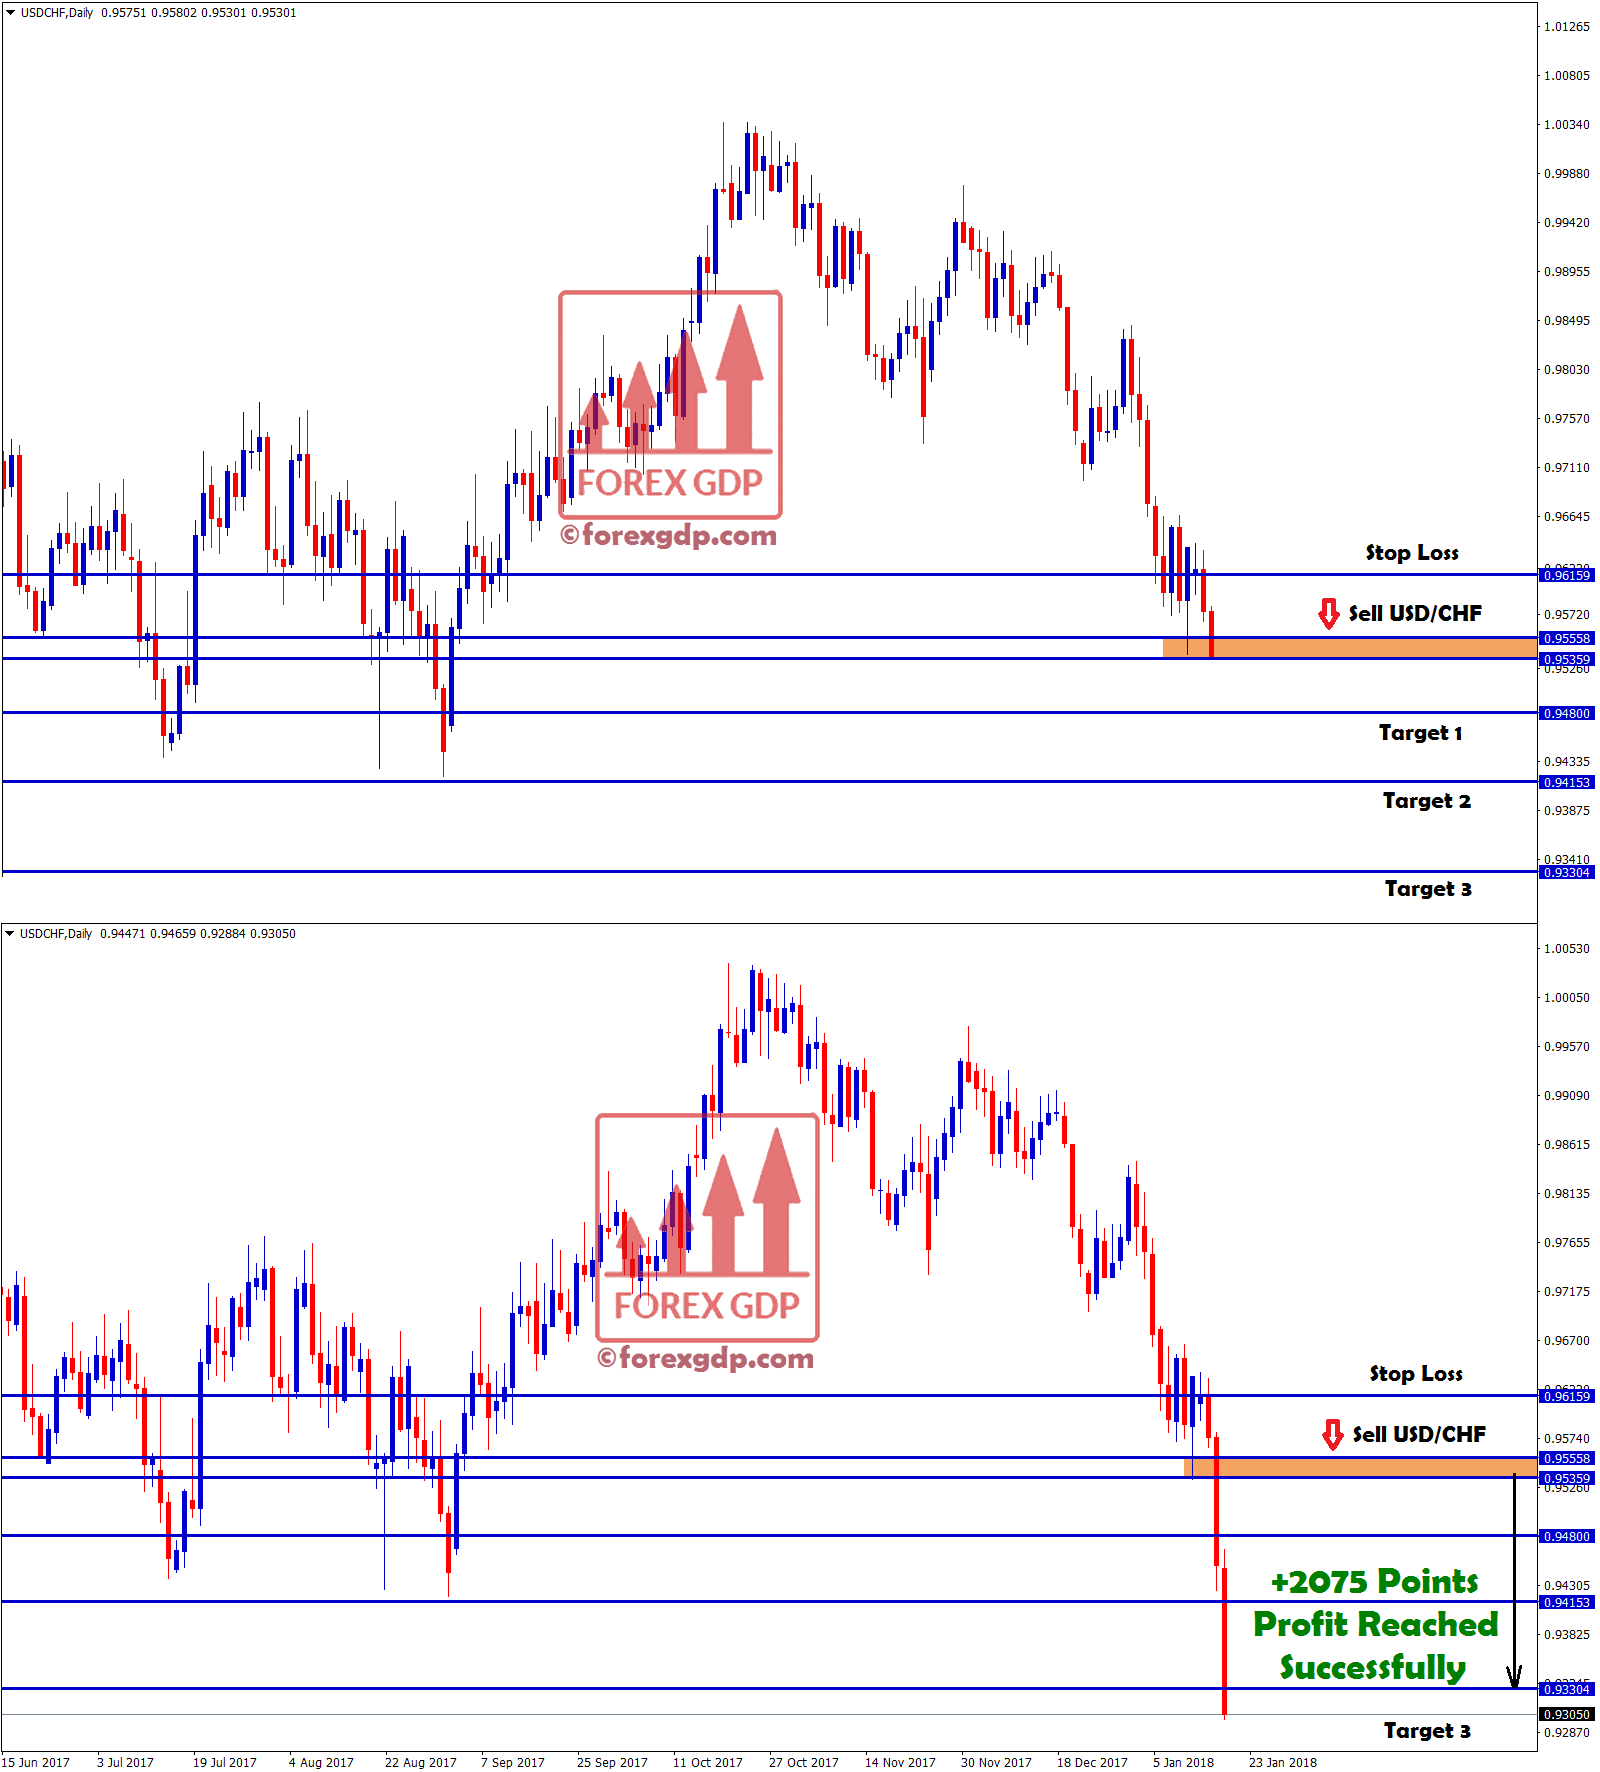 sell signal in usd chf hits target with +2075 points profit